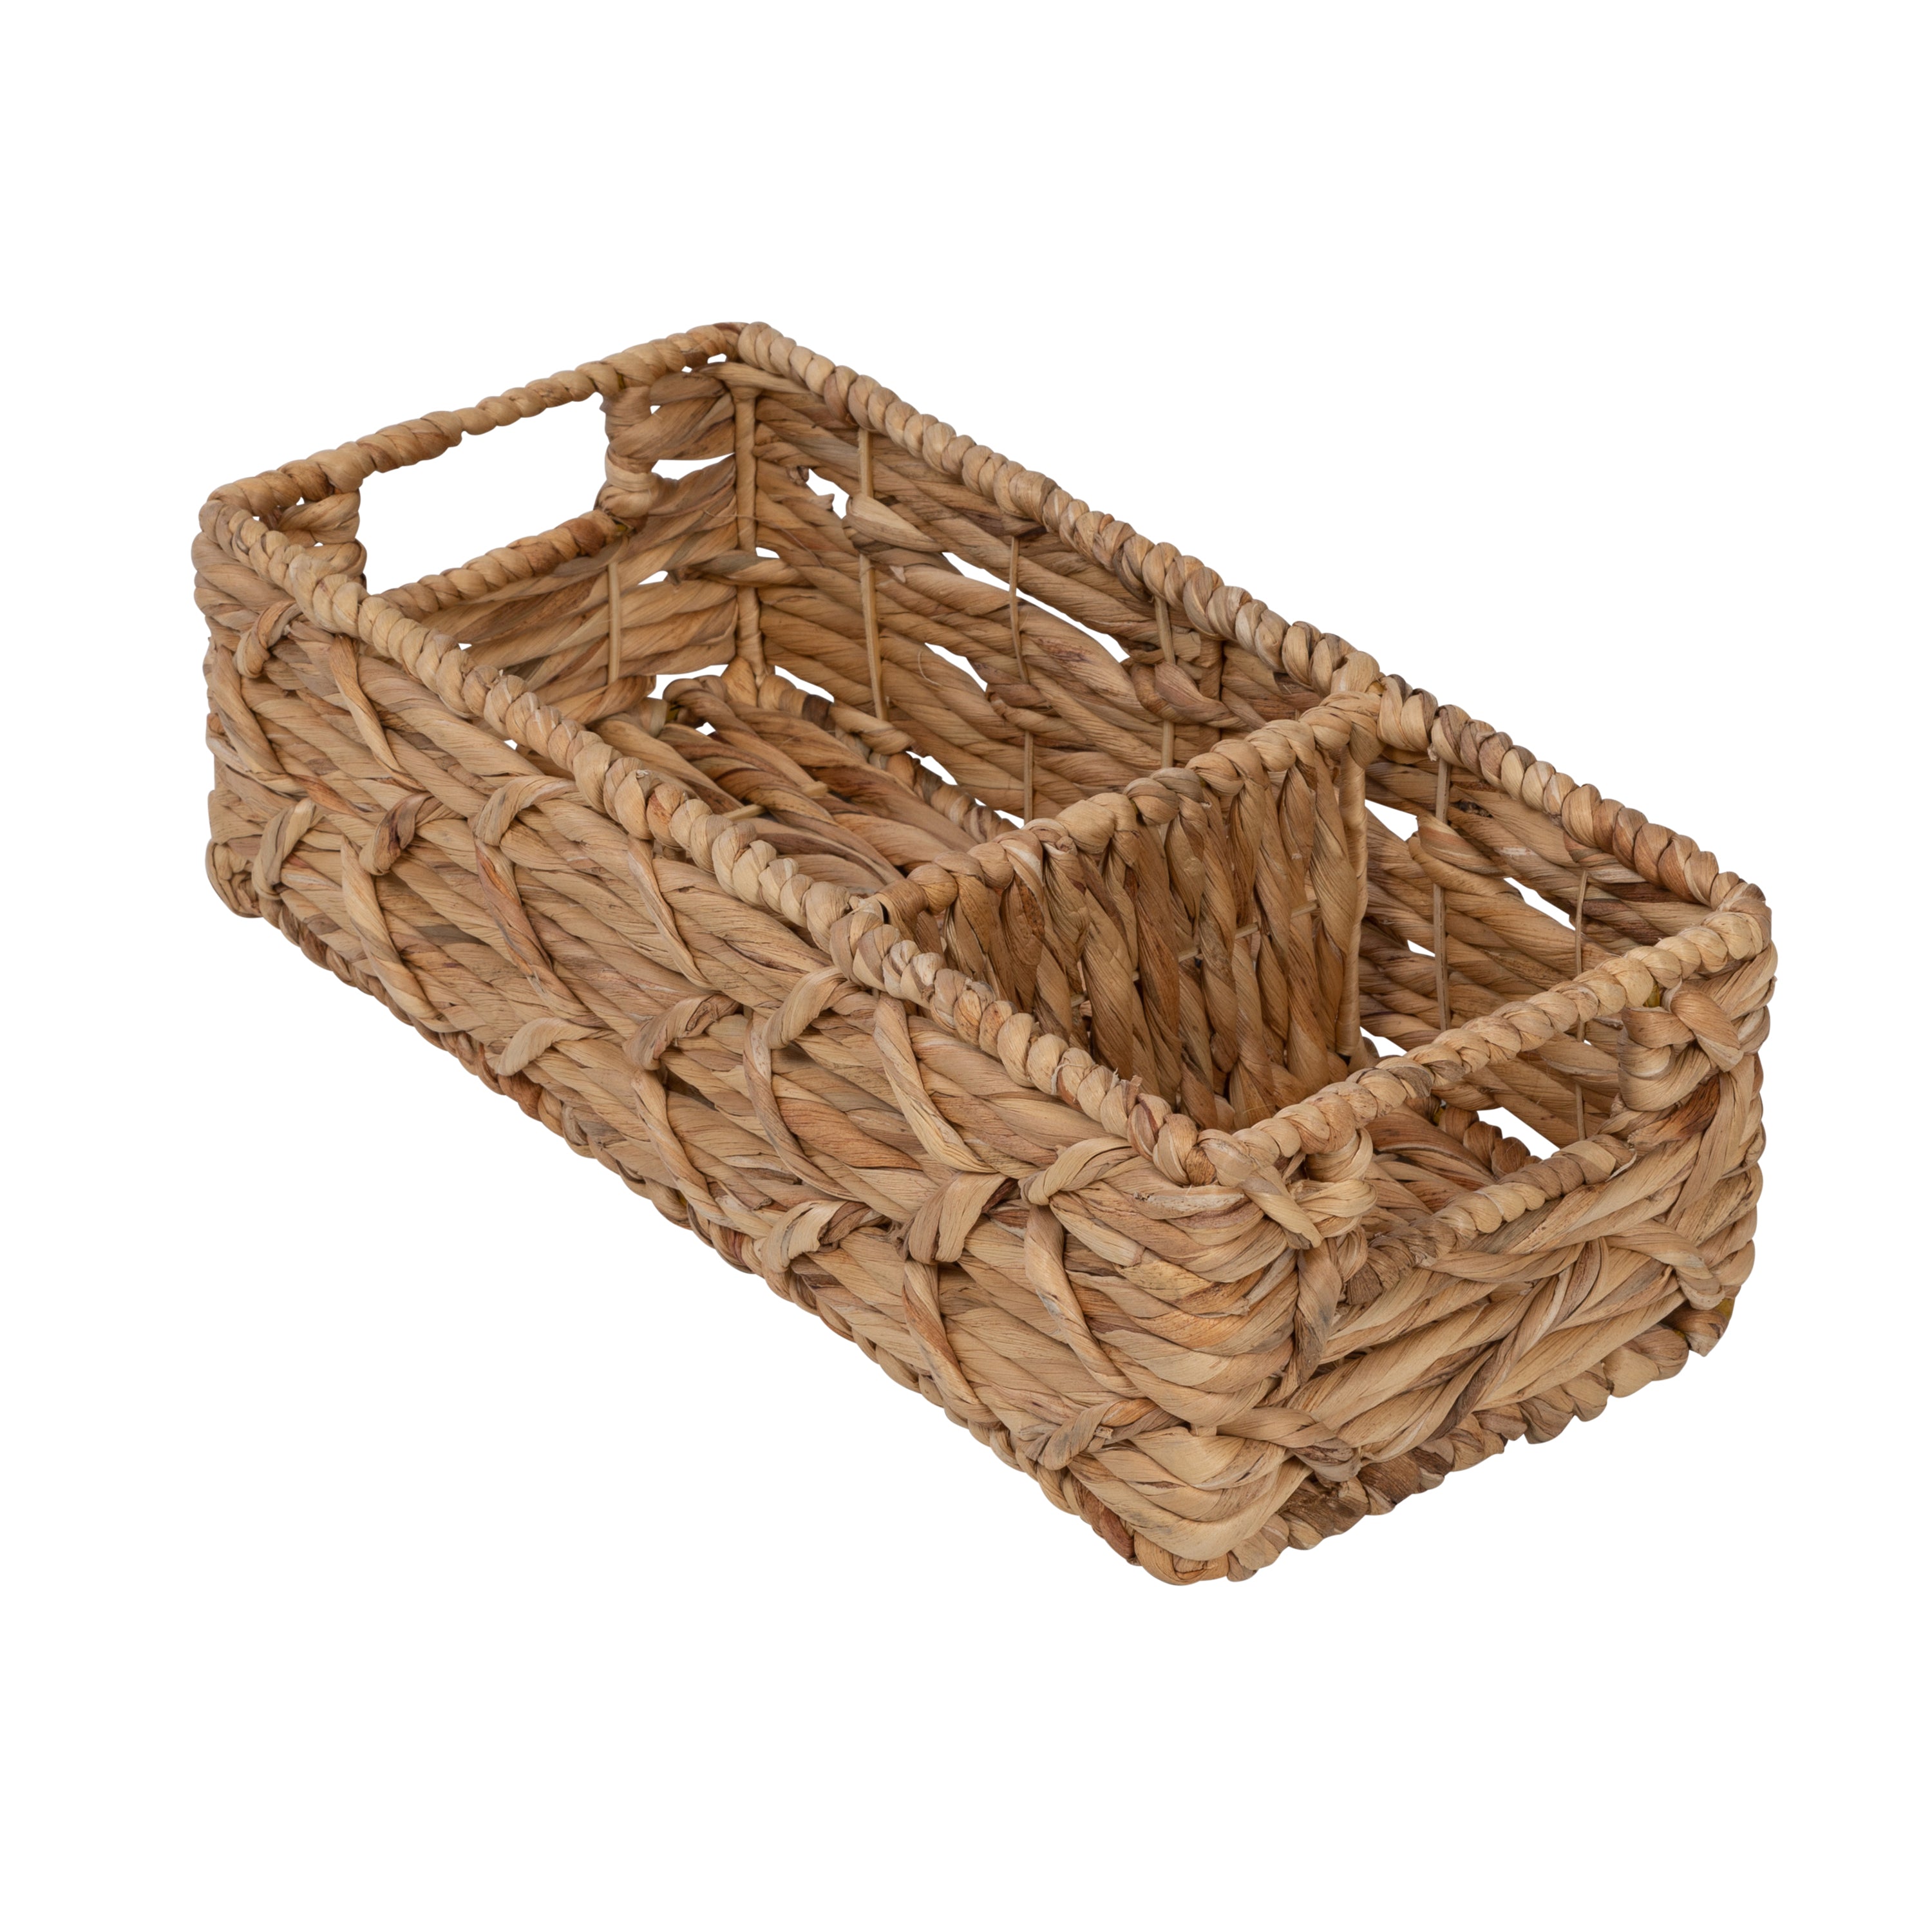 Empty Wicker Basket Tray With Dividers Isolated On White Stock Photo,  Picture and Royalty Free Image. Image 35345327.